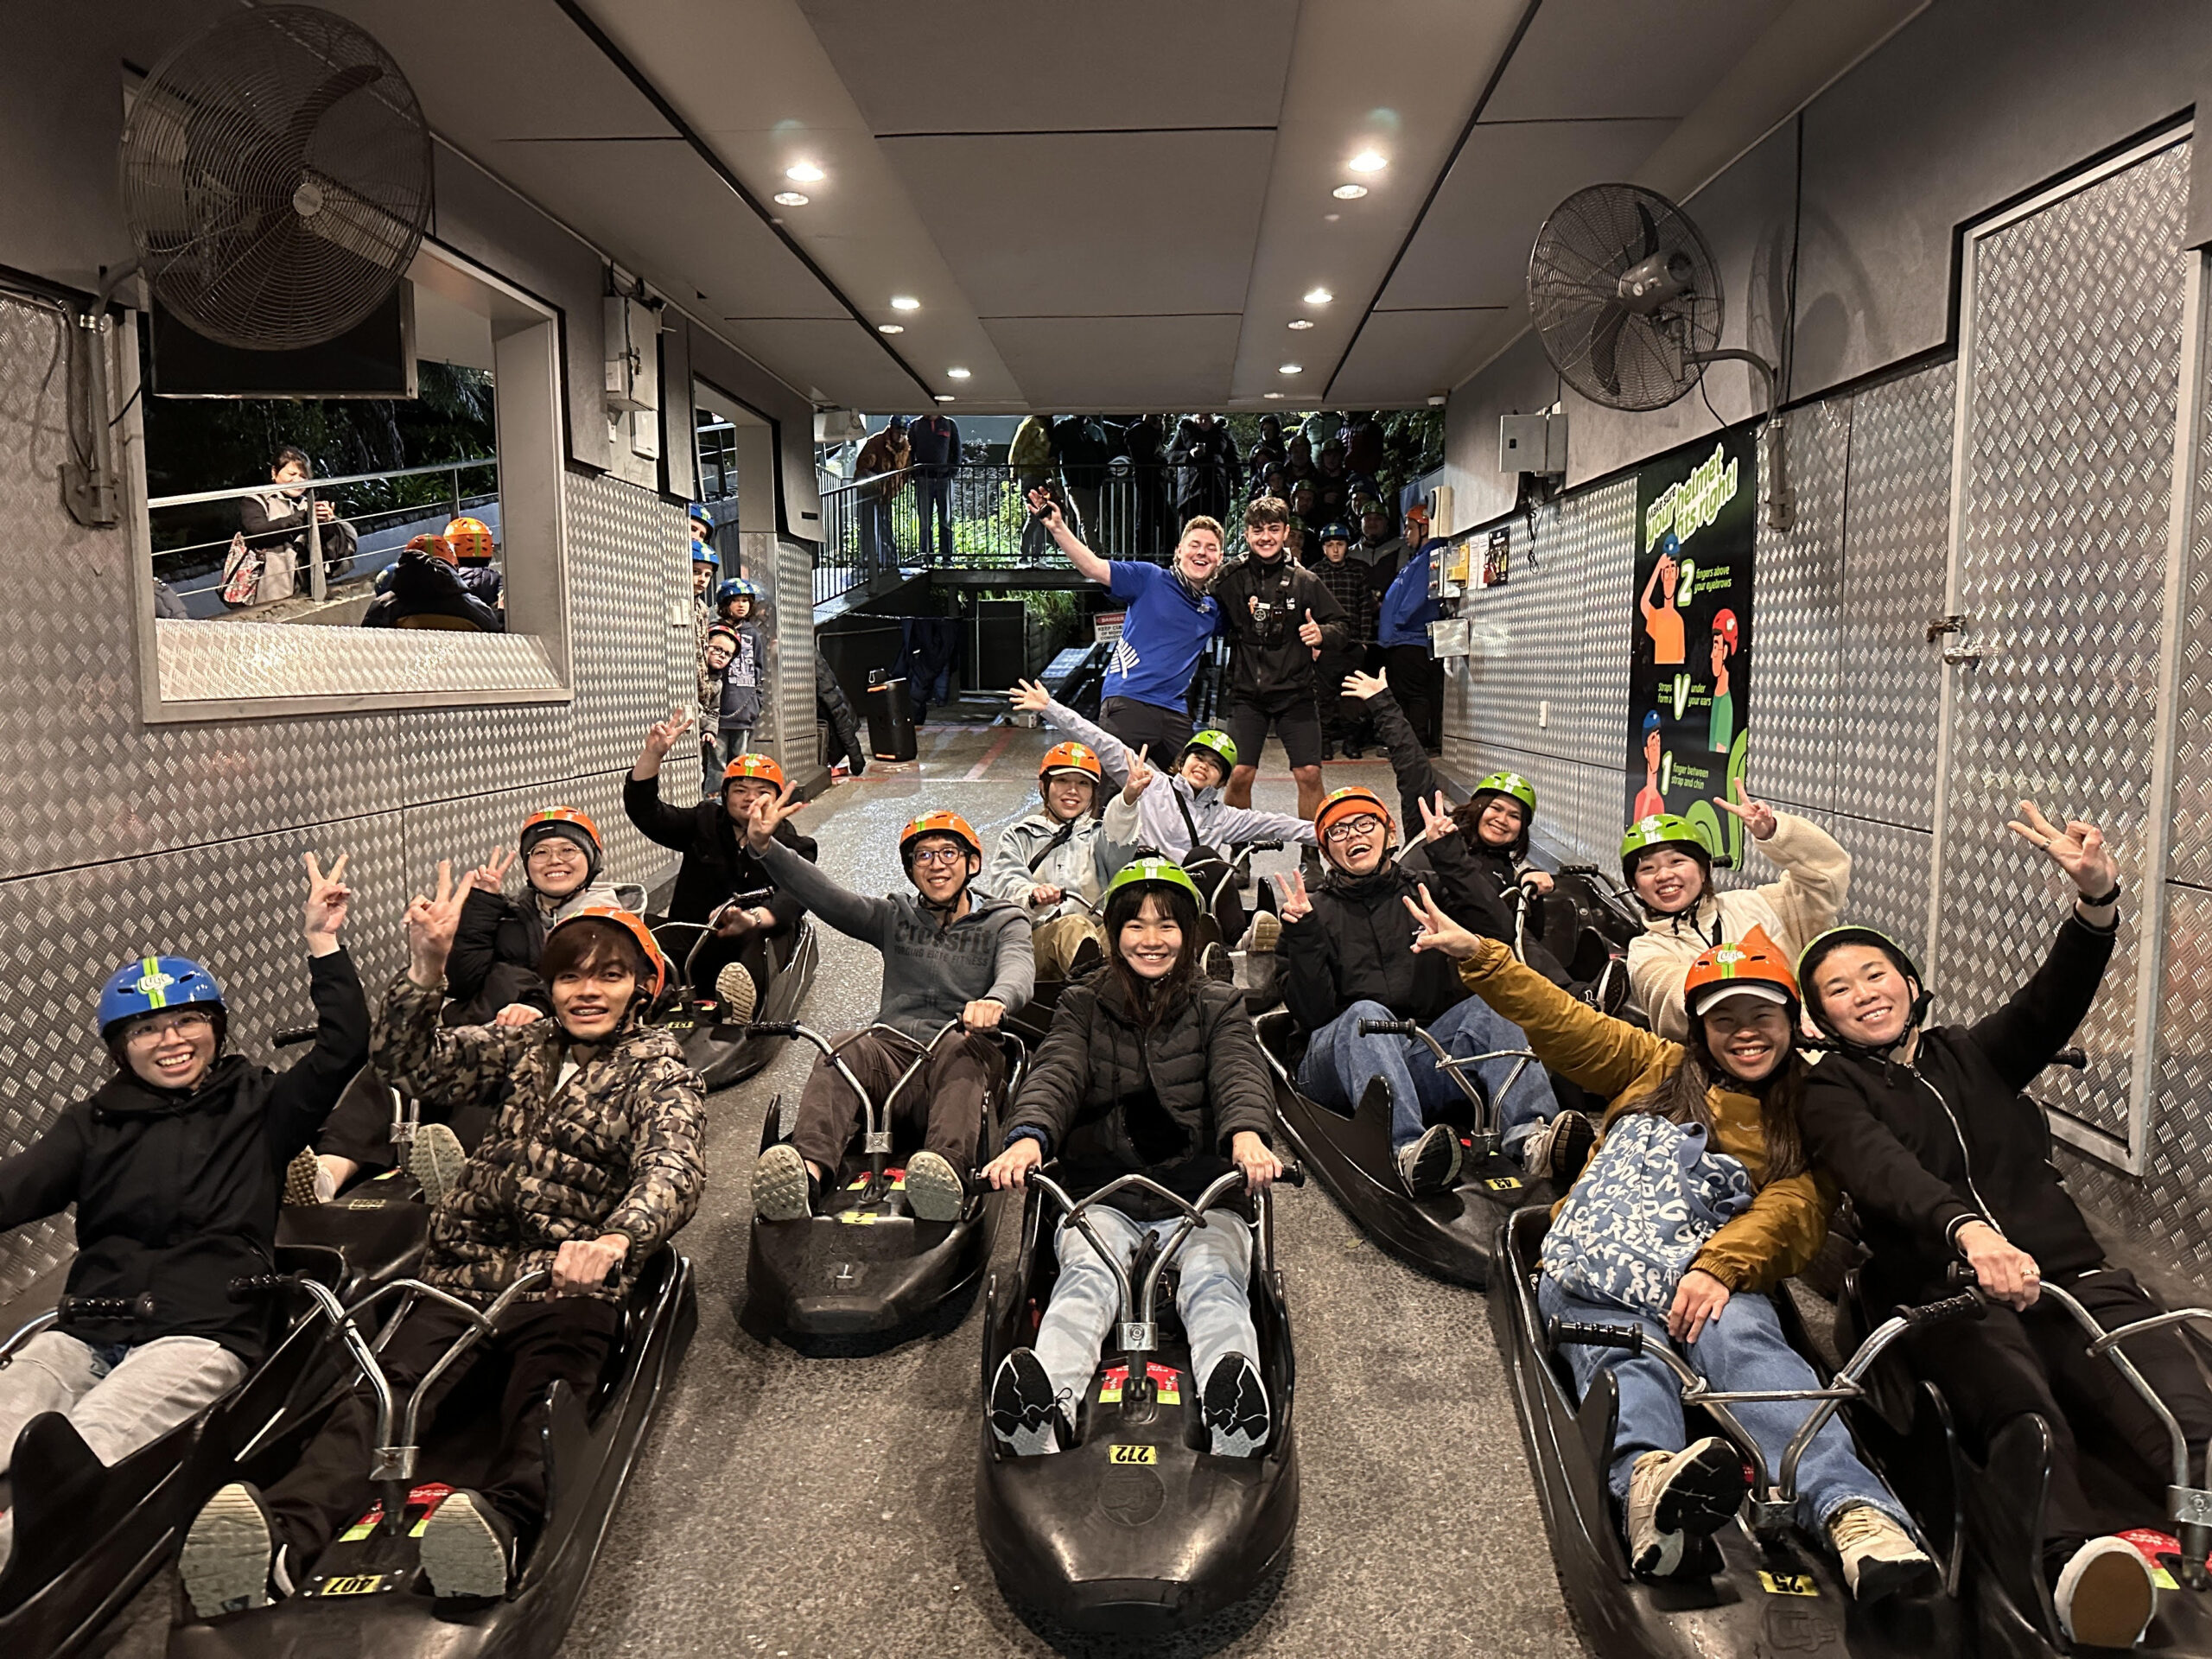 Kay at go kart course in new zealand with friends